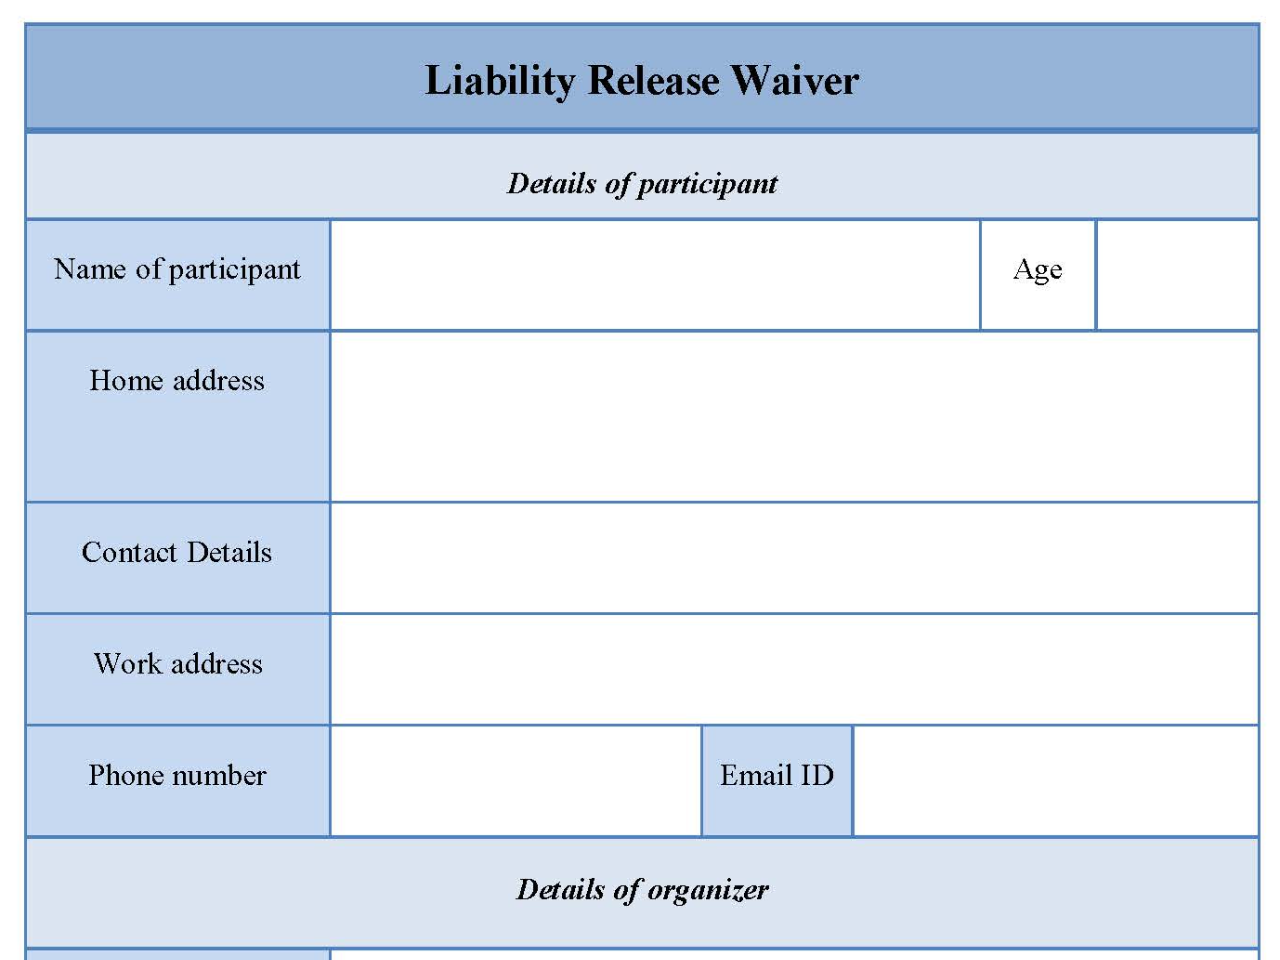 Liability Release Waiver Form